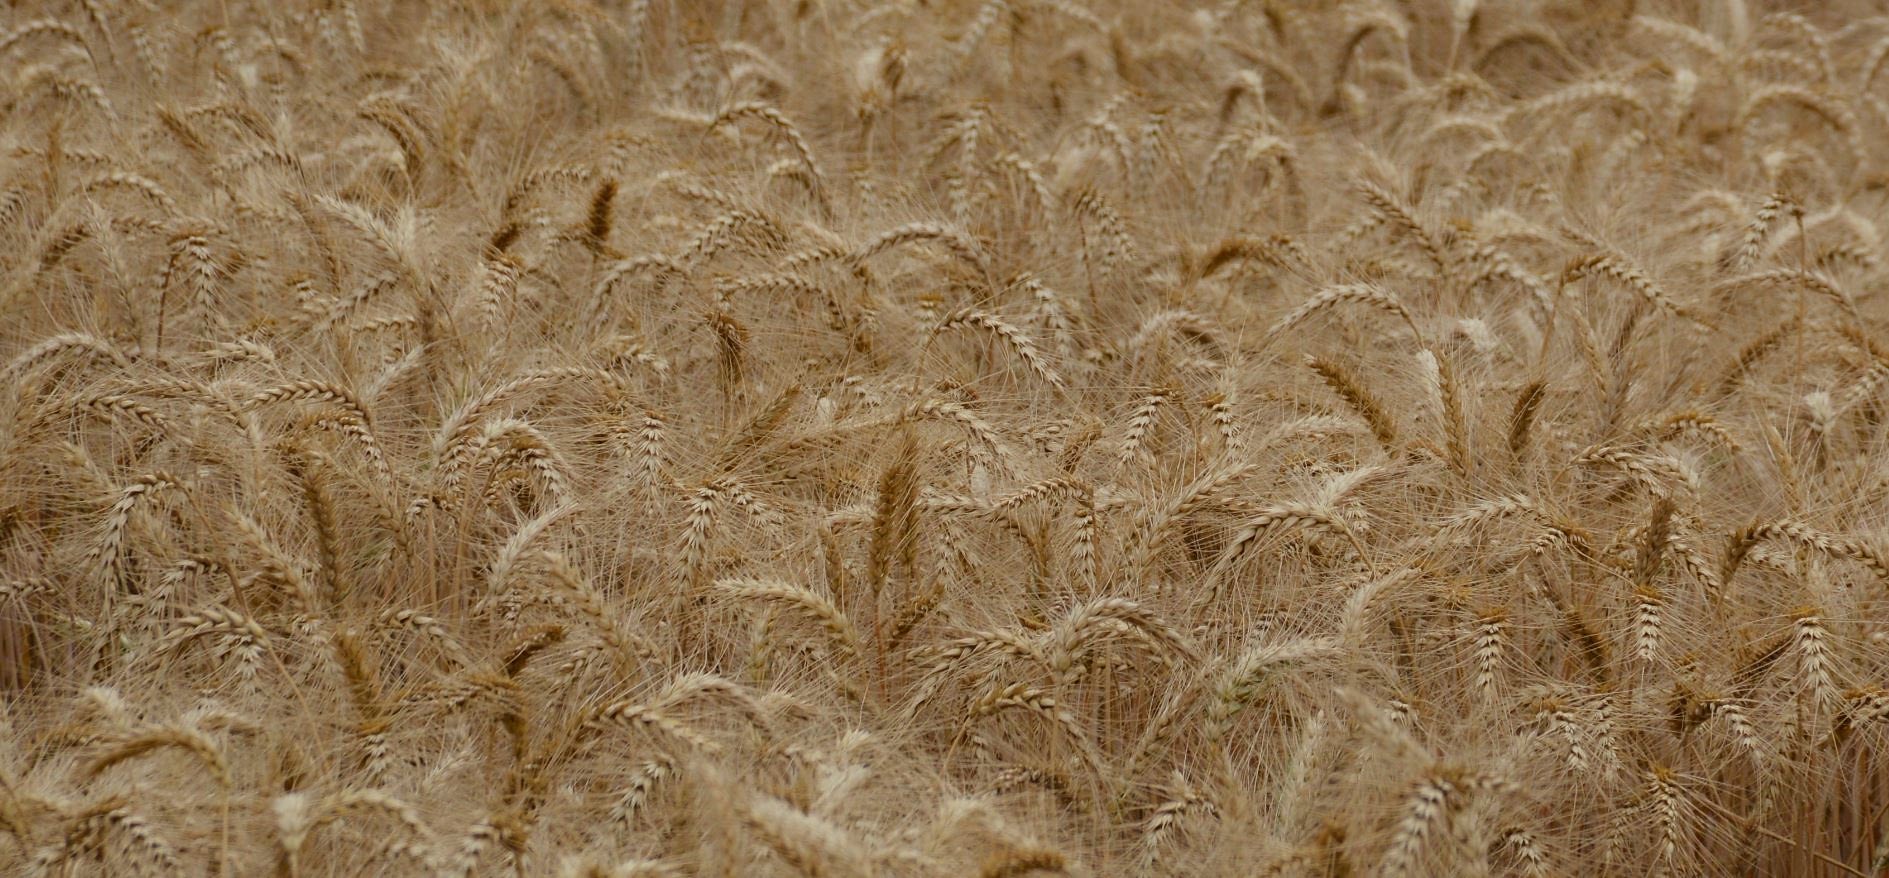 A wheat field in Pakistan, ready for harvest. (Photo: Kashif Syed/CIMMYT)